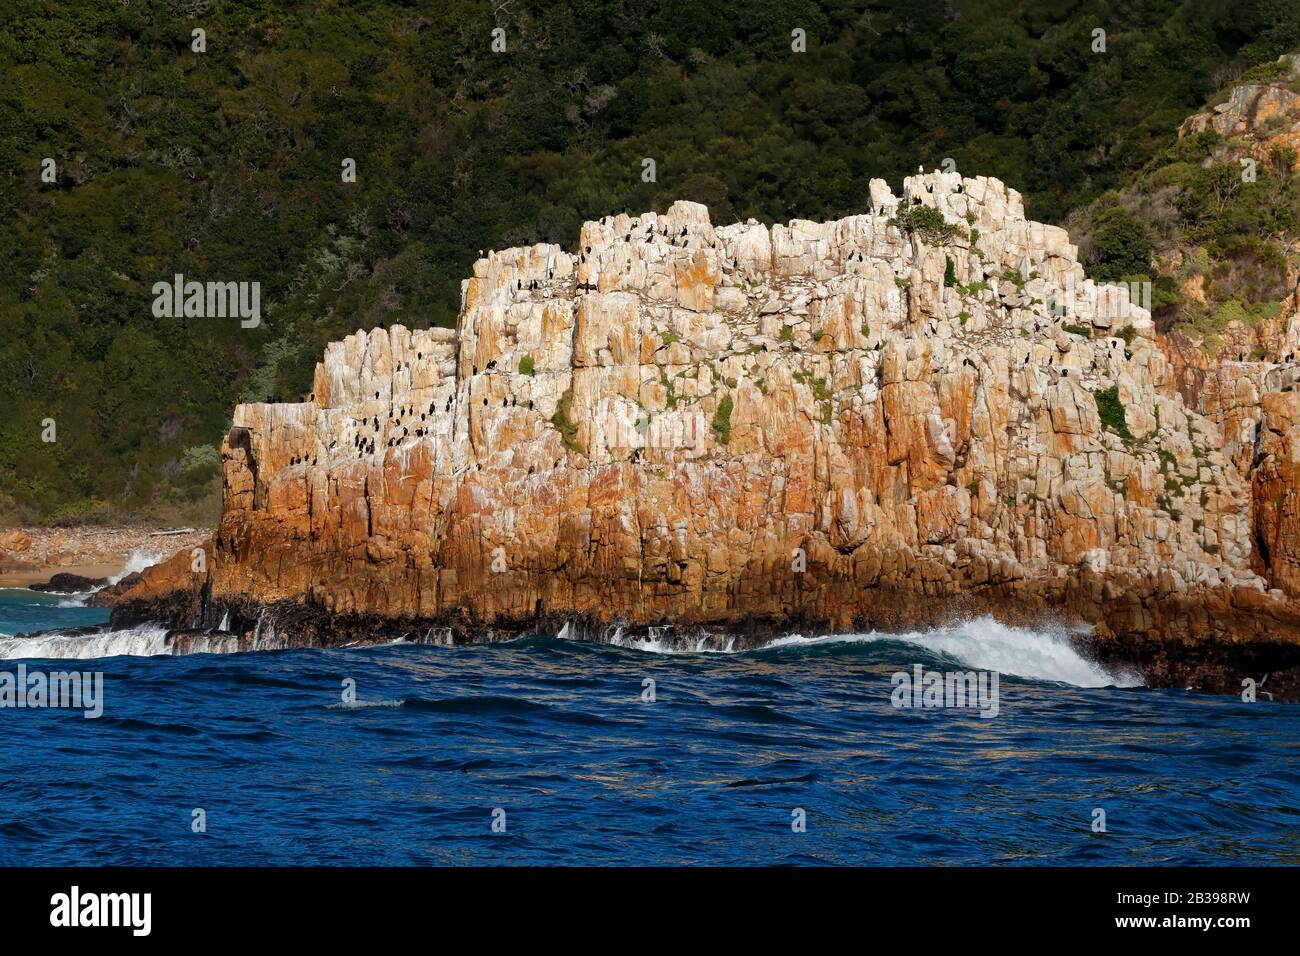 Seascape with large coastal rock and a colony of cormorant birds, South Africa Stock Photo